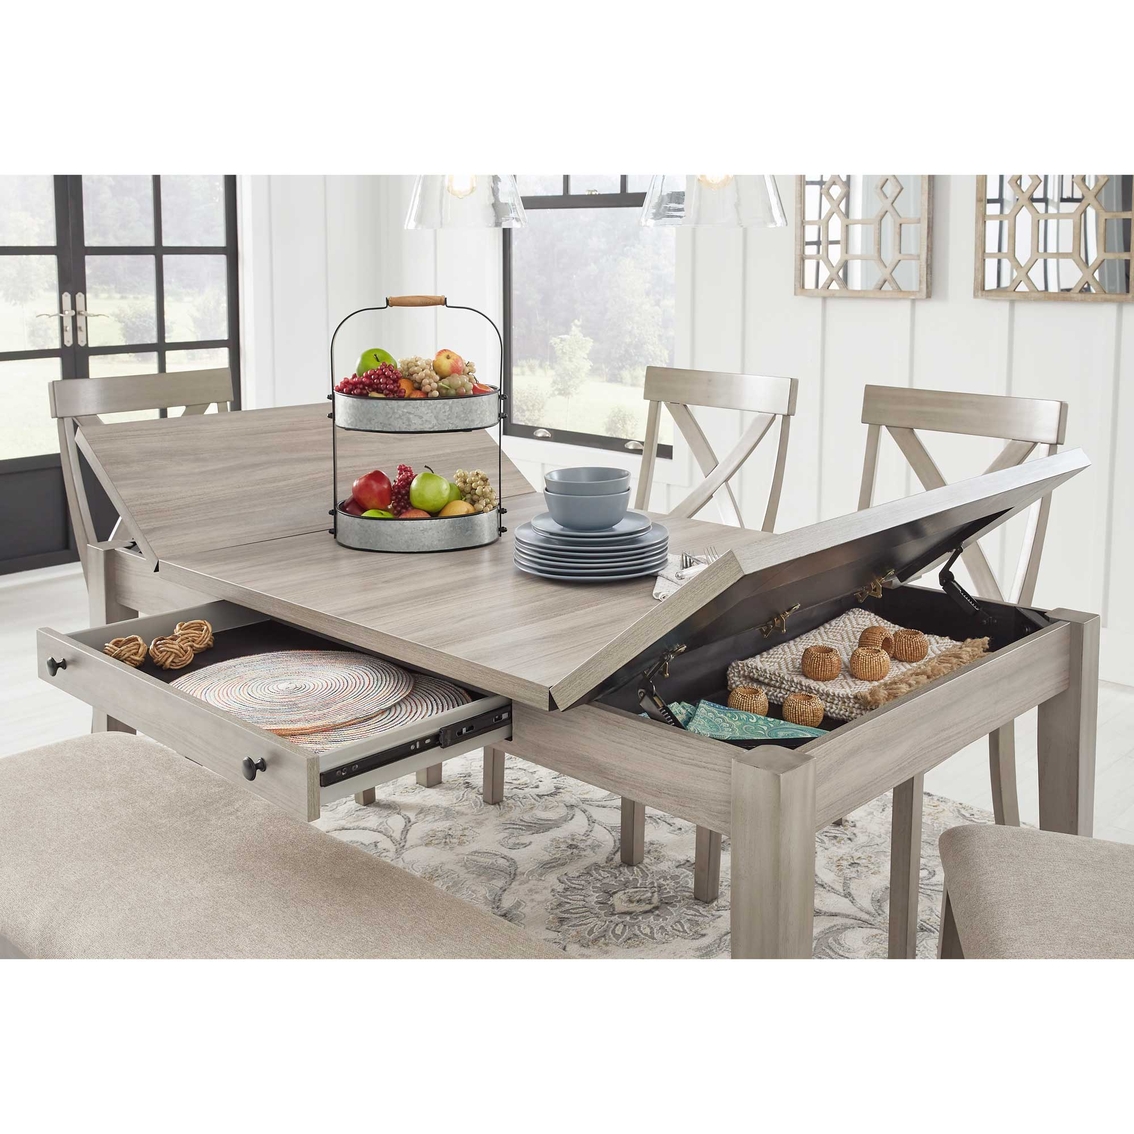 Signature Design by Ashley Parellen 6 pc. Dining Set: Table, 4 Chairs, Bench - Image 7 of 8